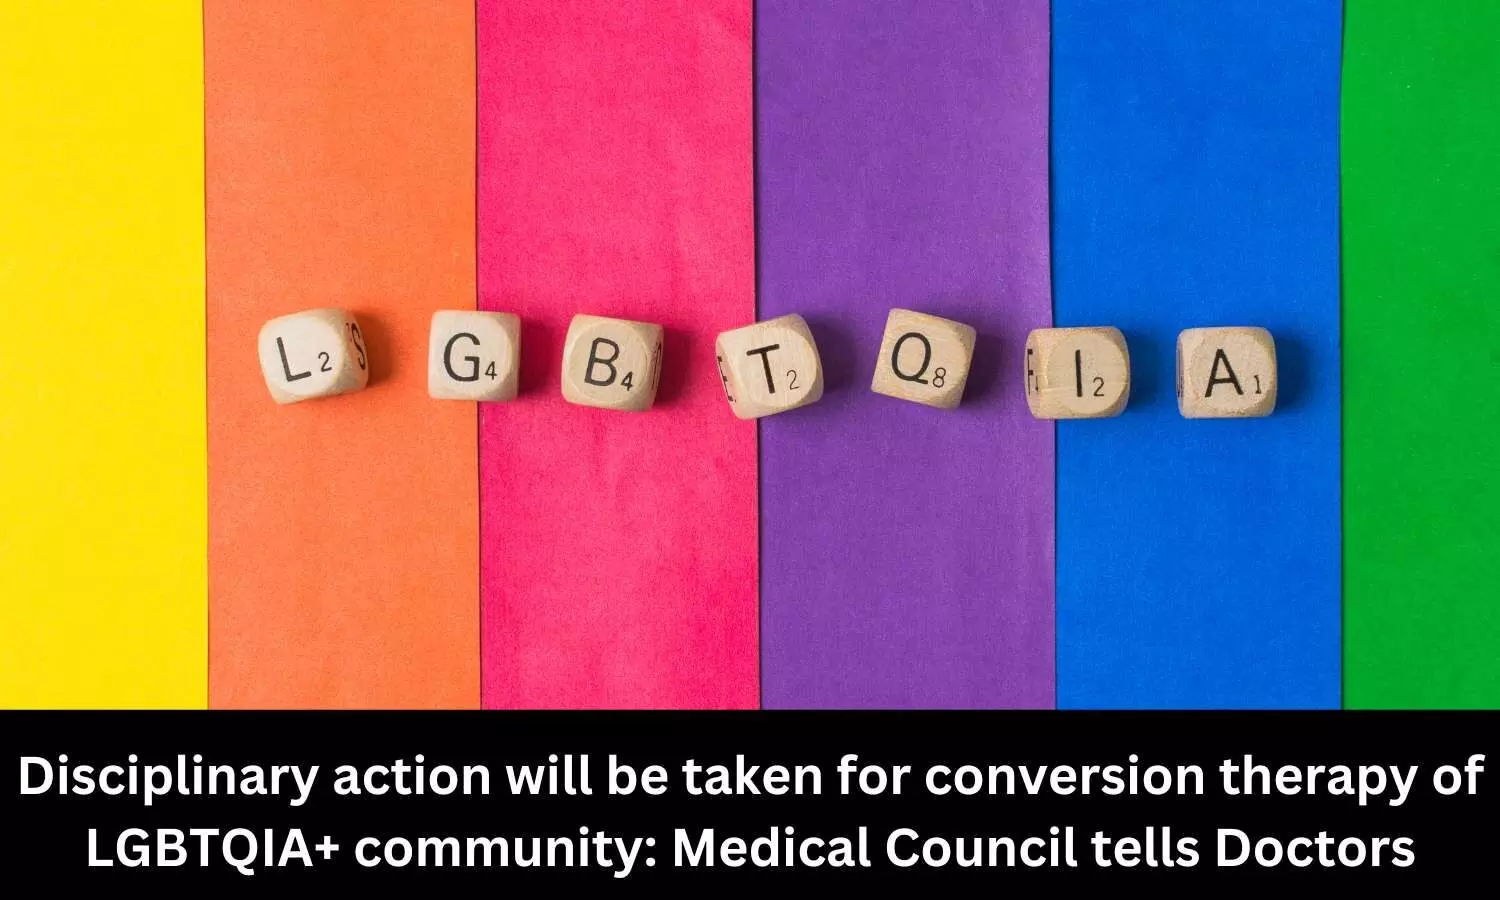 Disciplinary action will be taken for conversion therapy of LGBTQIA+ community: Medical Council tells Doctors